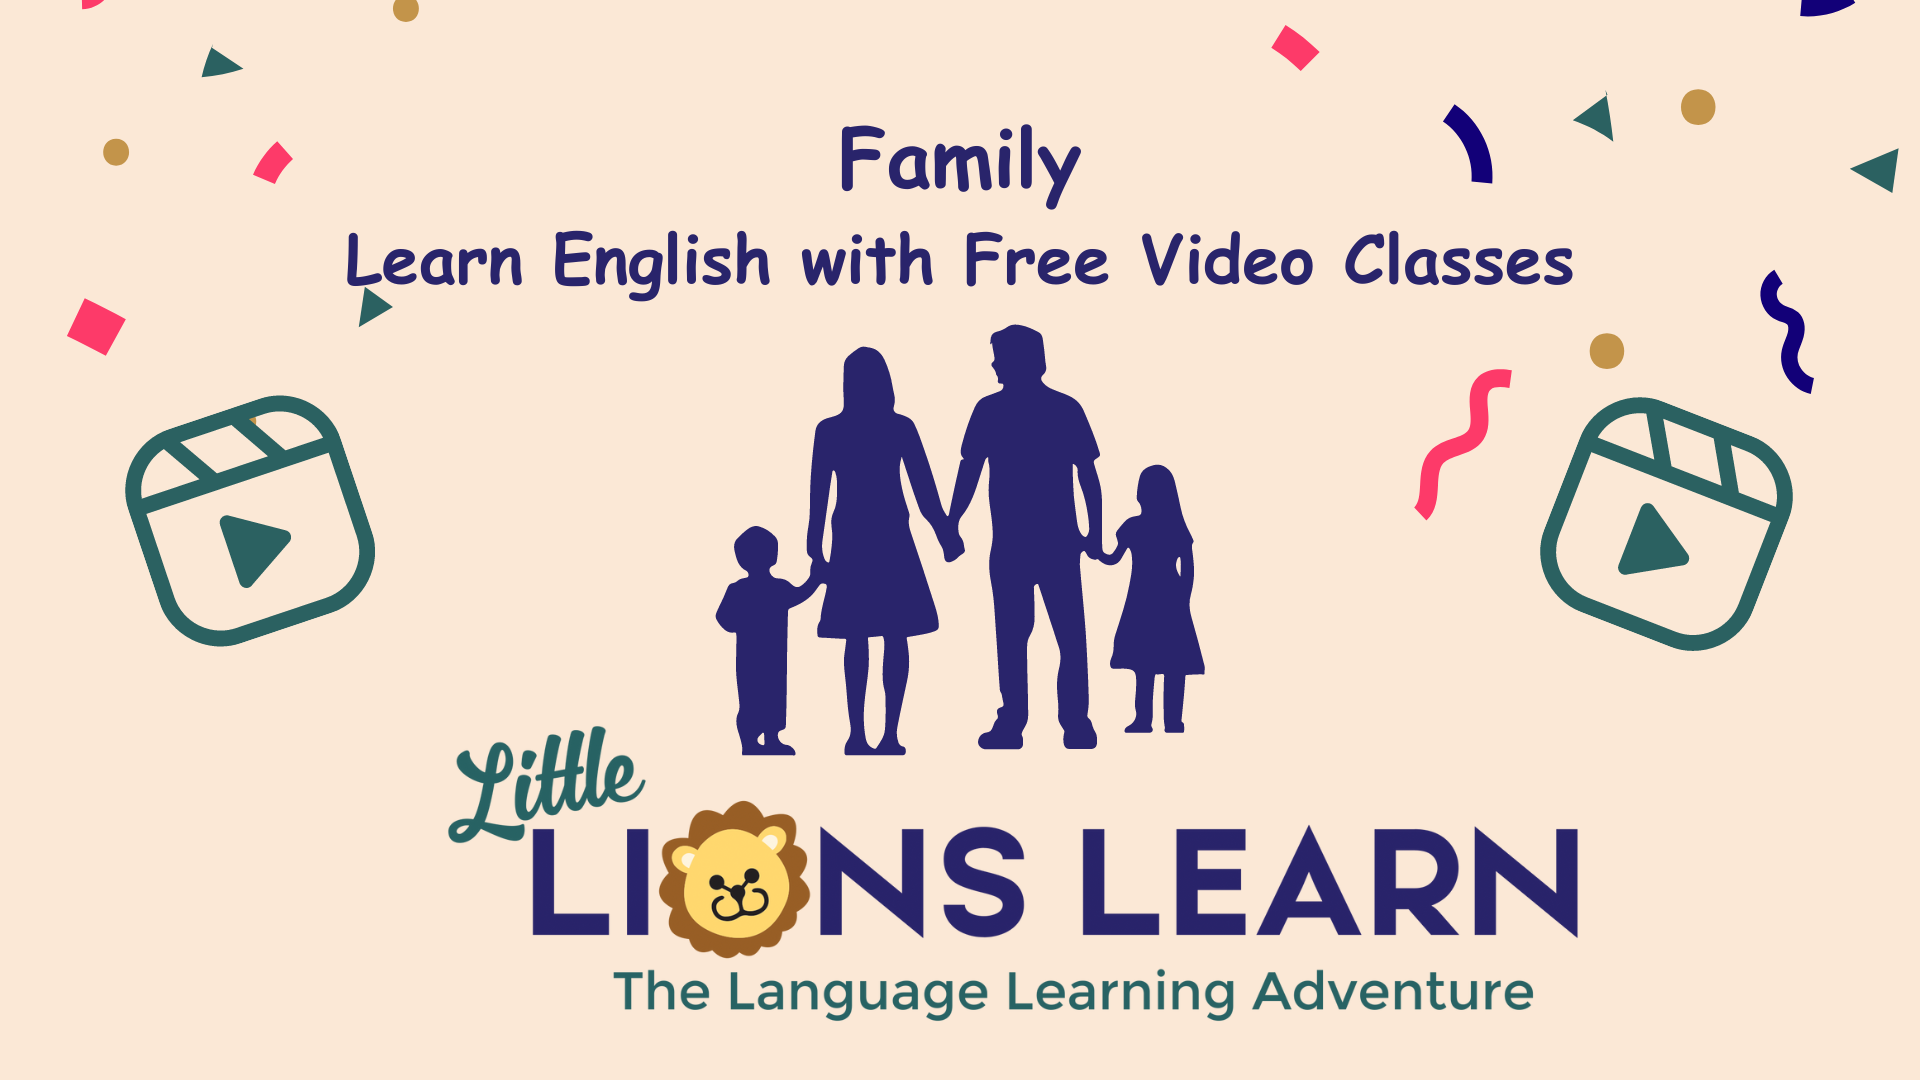 My Family Free Video Classes